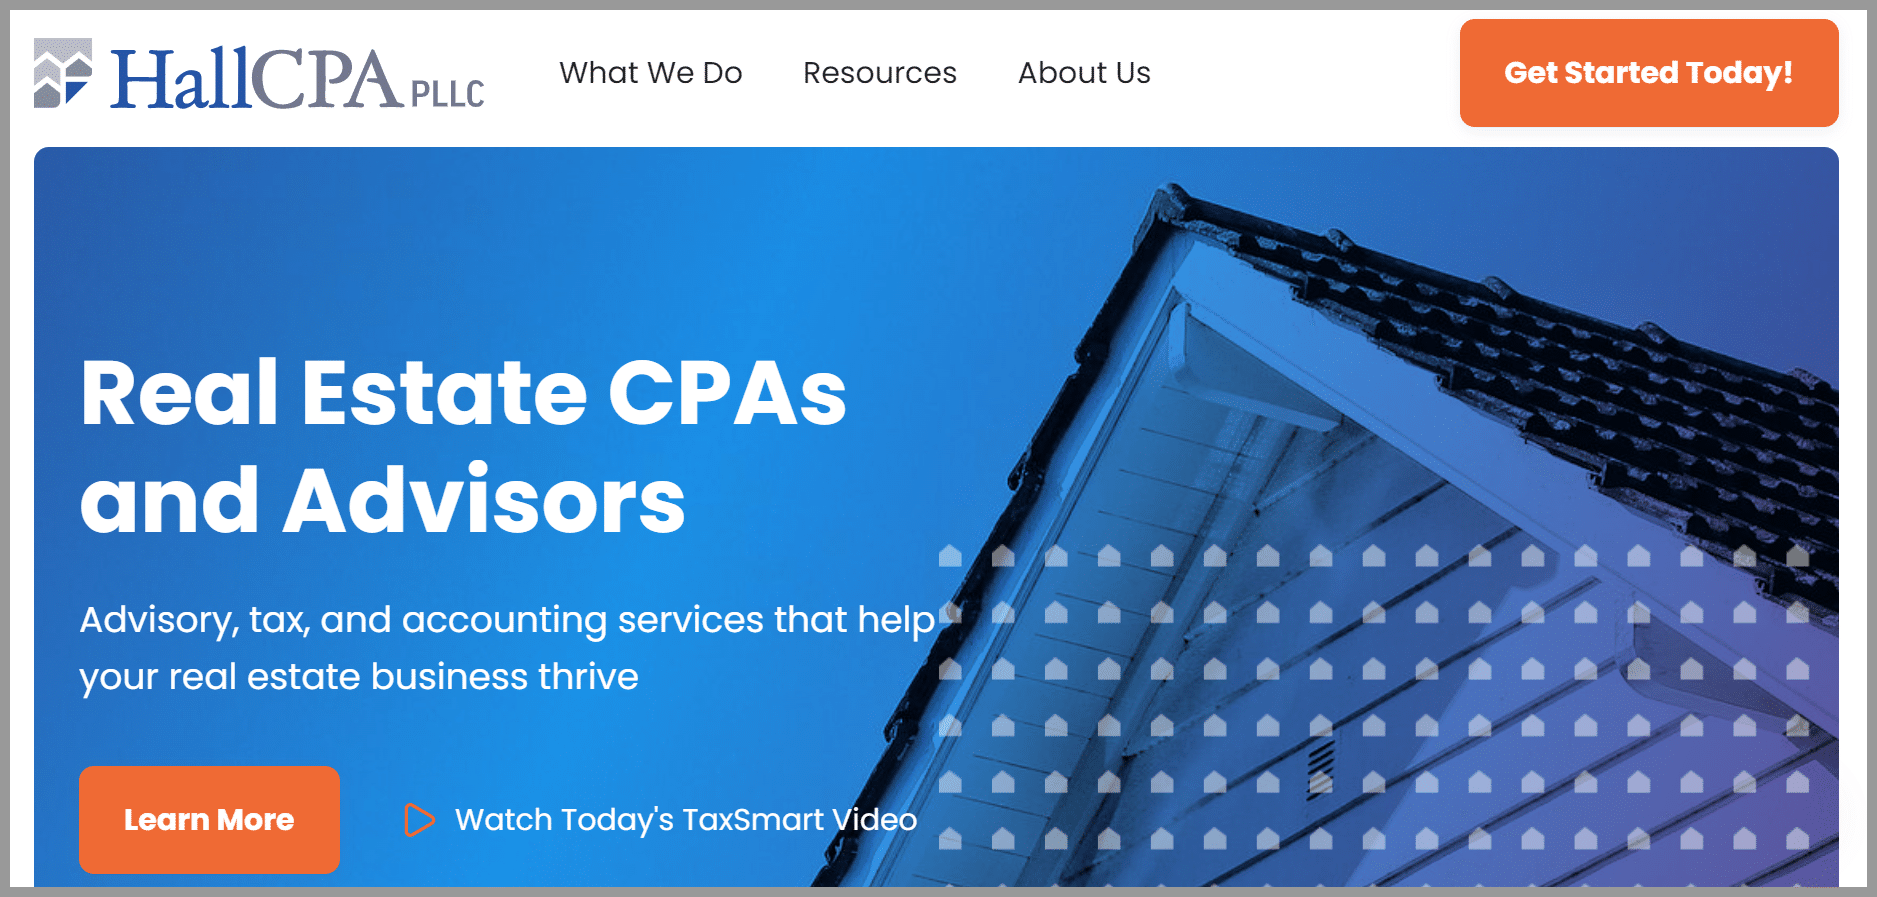 The Real Estate CPA Firm